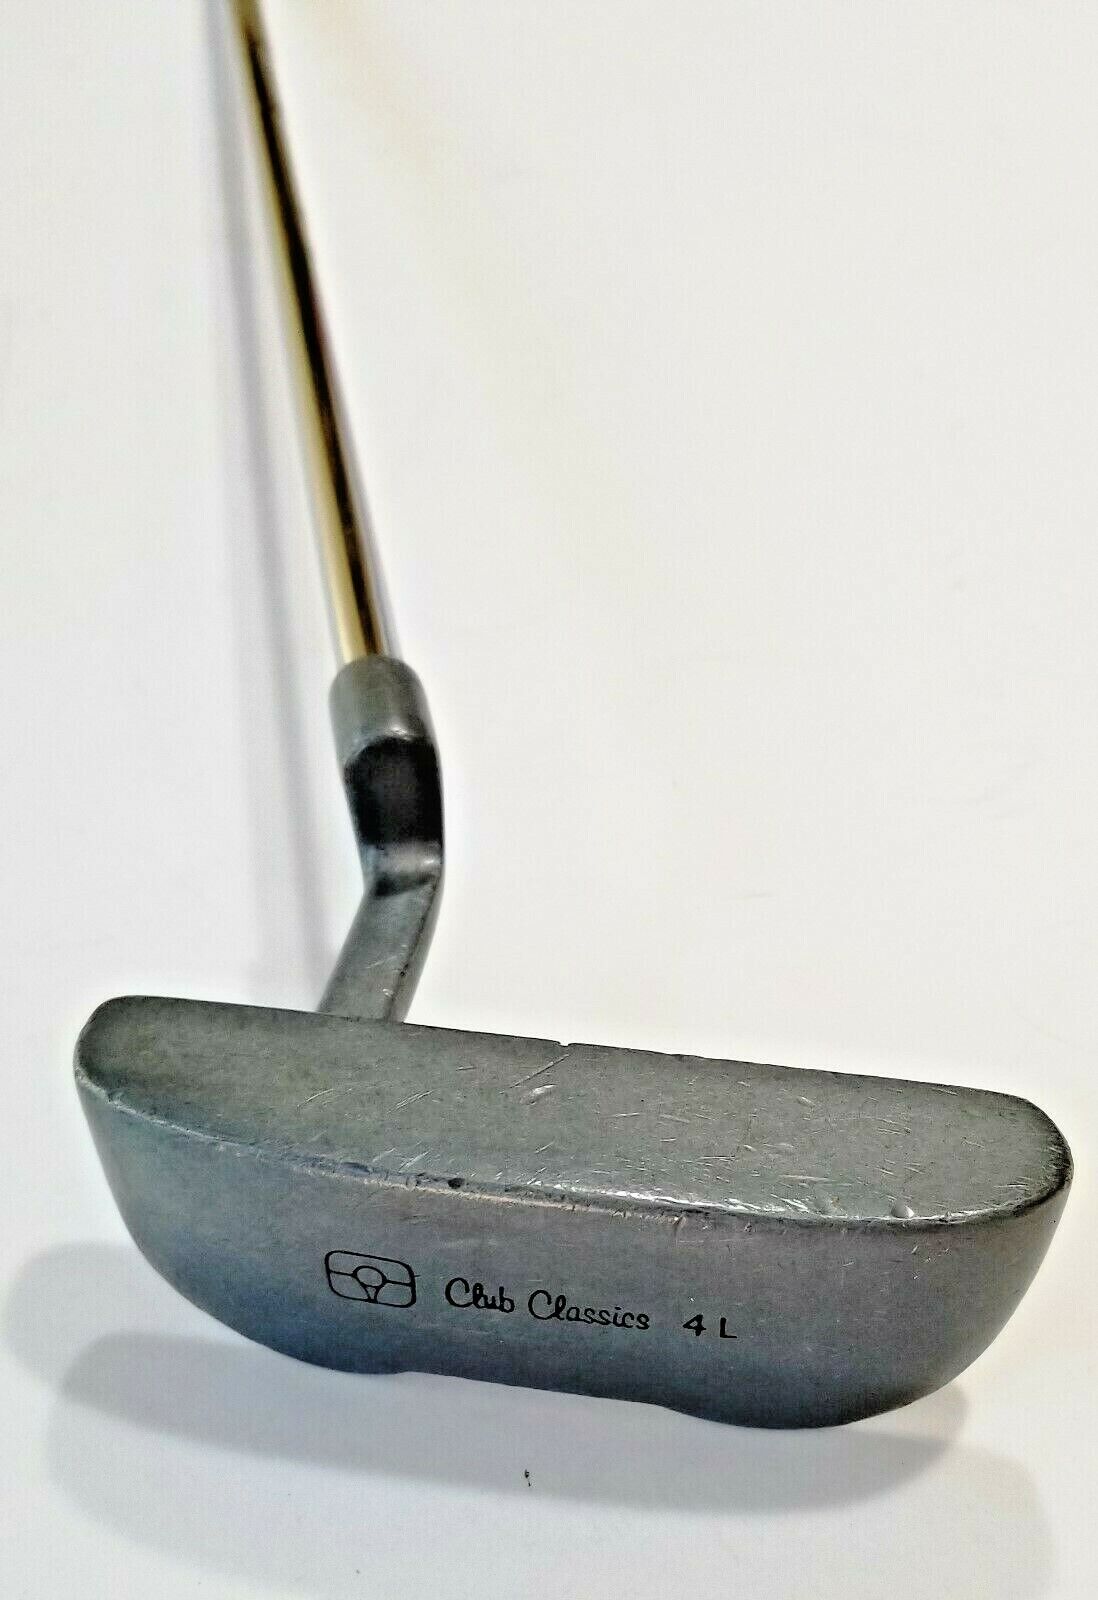 Sports Pride Club Classic 41 Professional Golf Club Putter Left Handed